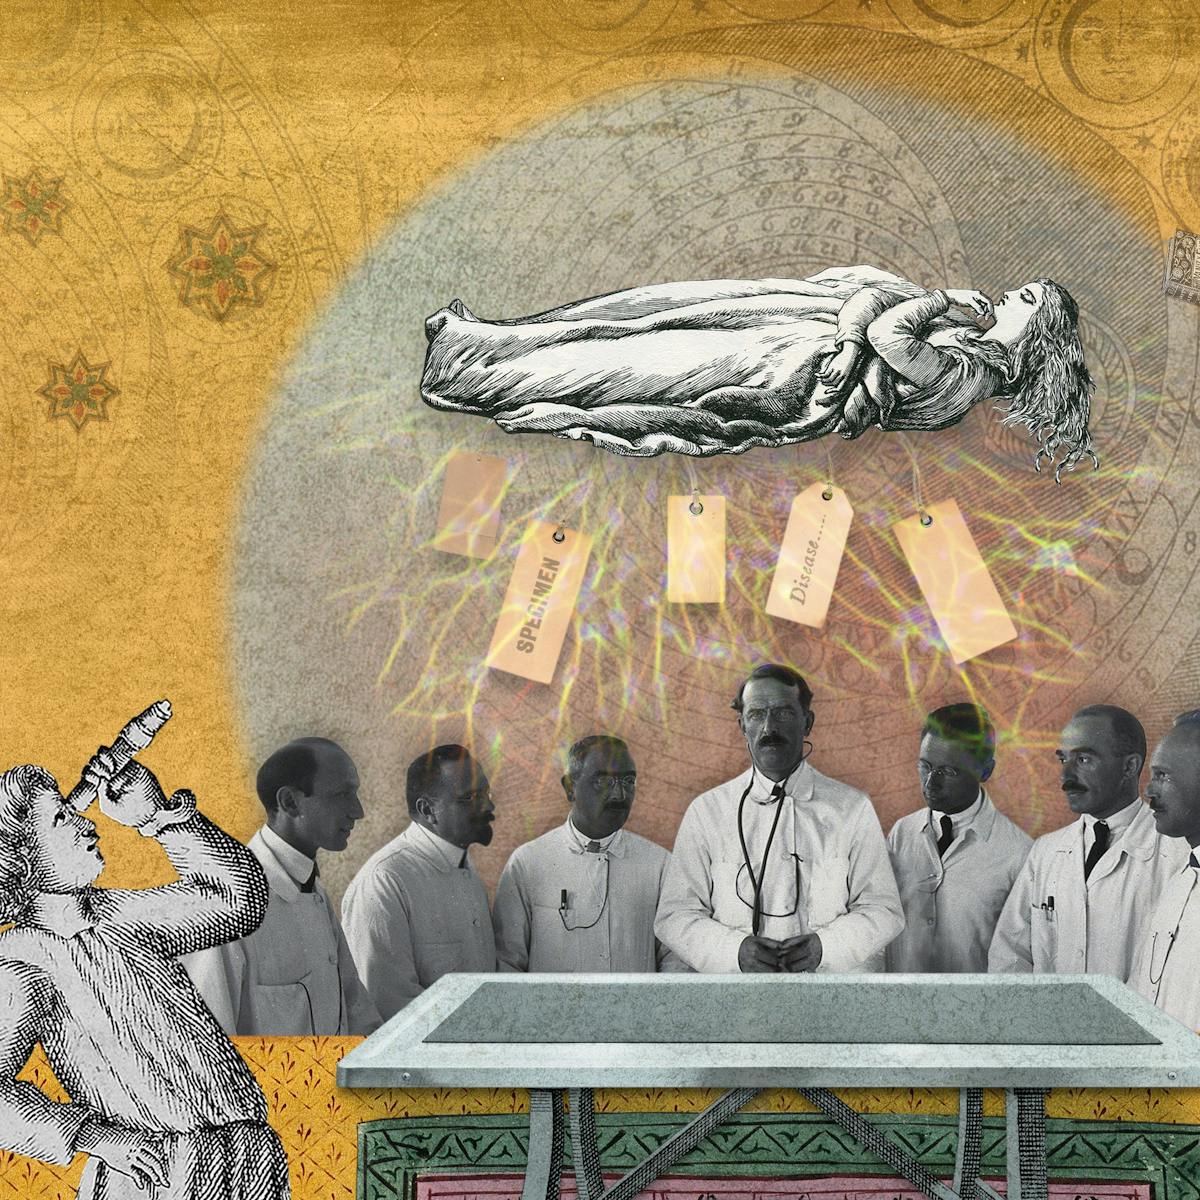 Illustration using collage techniques. Image shows a scene made up of mainly yellow and green hues. To the bottom centre is am examination table behind which stand 7 male doctors in white coats. Above them hovers a horizontal female figure, her arms crossed over her upper body. Hanging from beneath her are 5 paper labels with the text, 'Specimen' and 'Disease...' written on 2 of them. To the left of the image is an engraving of a young man looking at the floating figure through a telescope. To the right are illustrations of a plant and part of the palm leaves from a tree as well as an engraving of an academic male figure who looks like he's talking about the floating figure. Books and stars float around the floating figure.